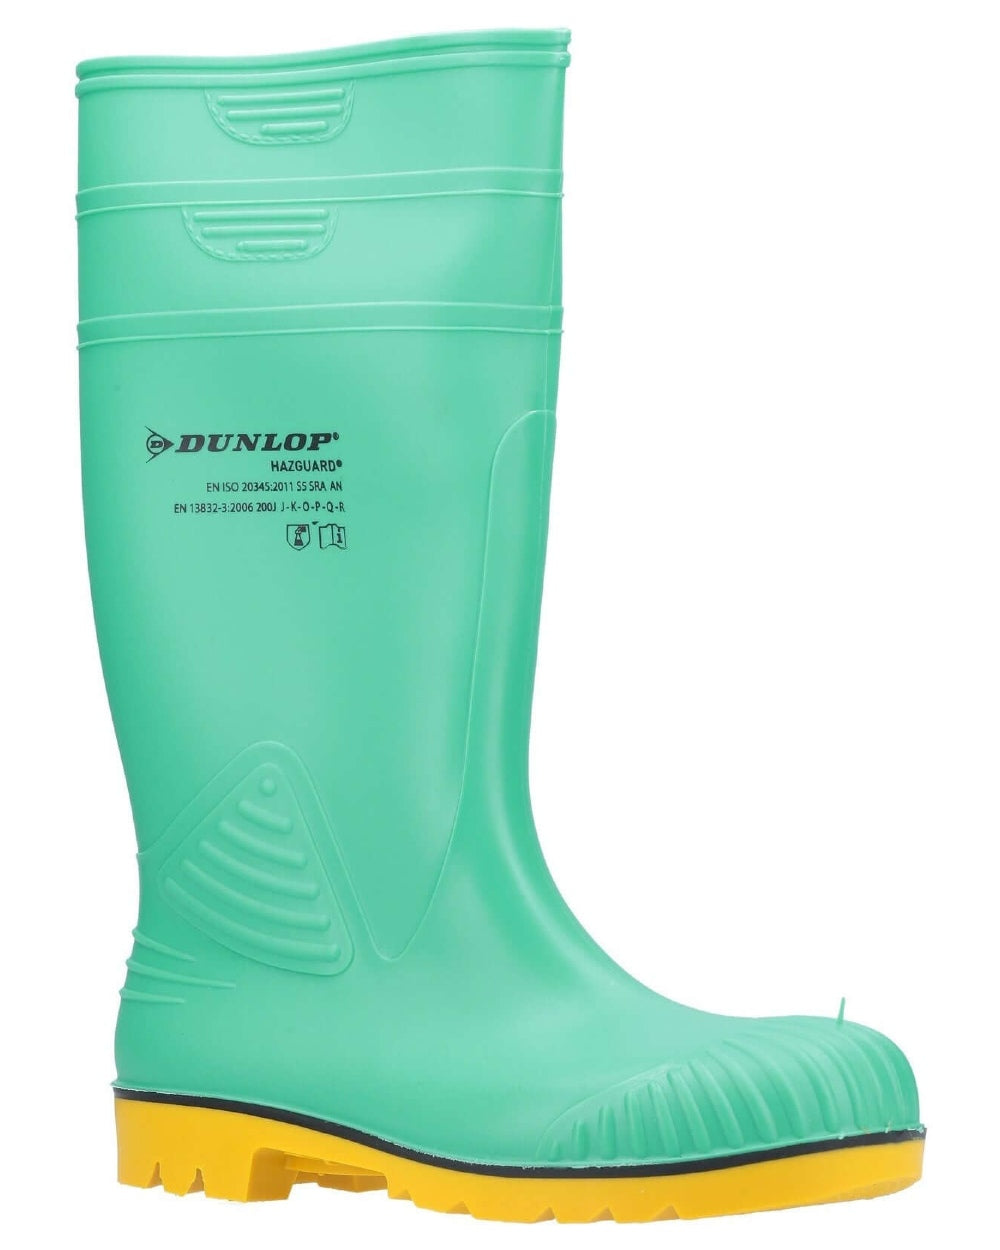 Green/Black/Yellow coloured Dunlop Acifort HazGuard Safety Wellingtons on white background 